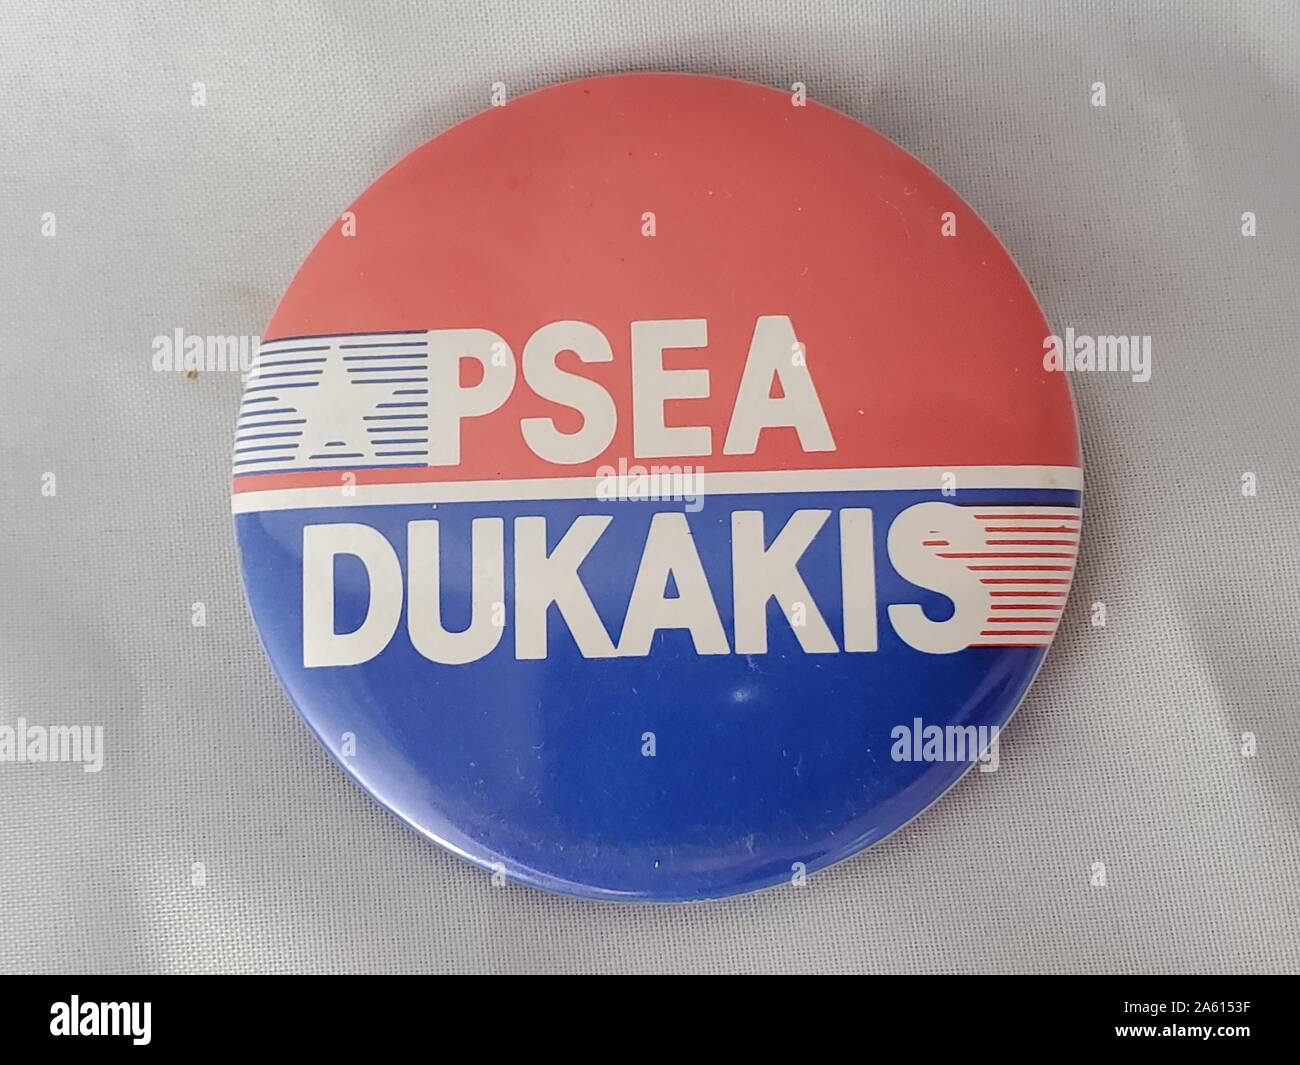 Red, white, and blue pin-back button or badge, with a star, stripes, and the text 'PSEA/Dukakis' issued by the Pennsylvania State Education Association (PSEA) for the Michael Dukakis presidential campaign, United States of America, 1988. () Stock Photo